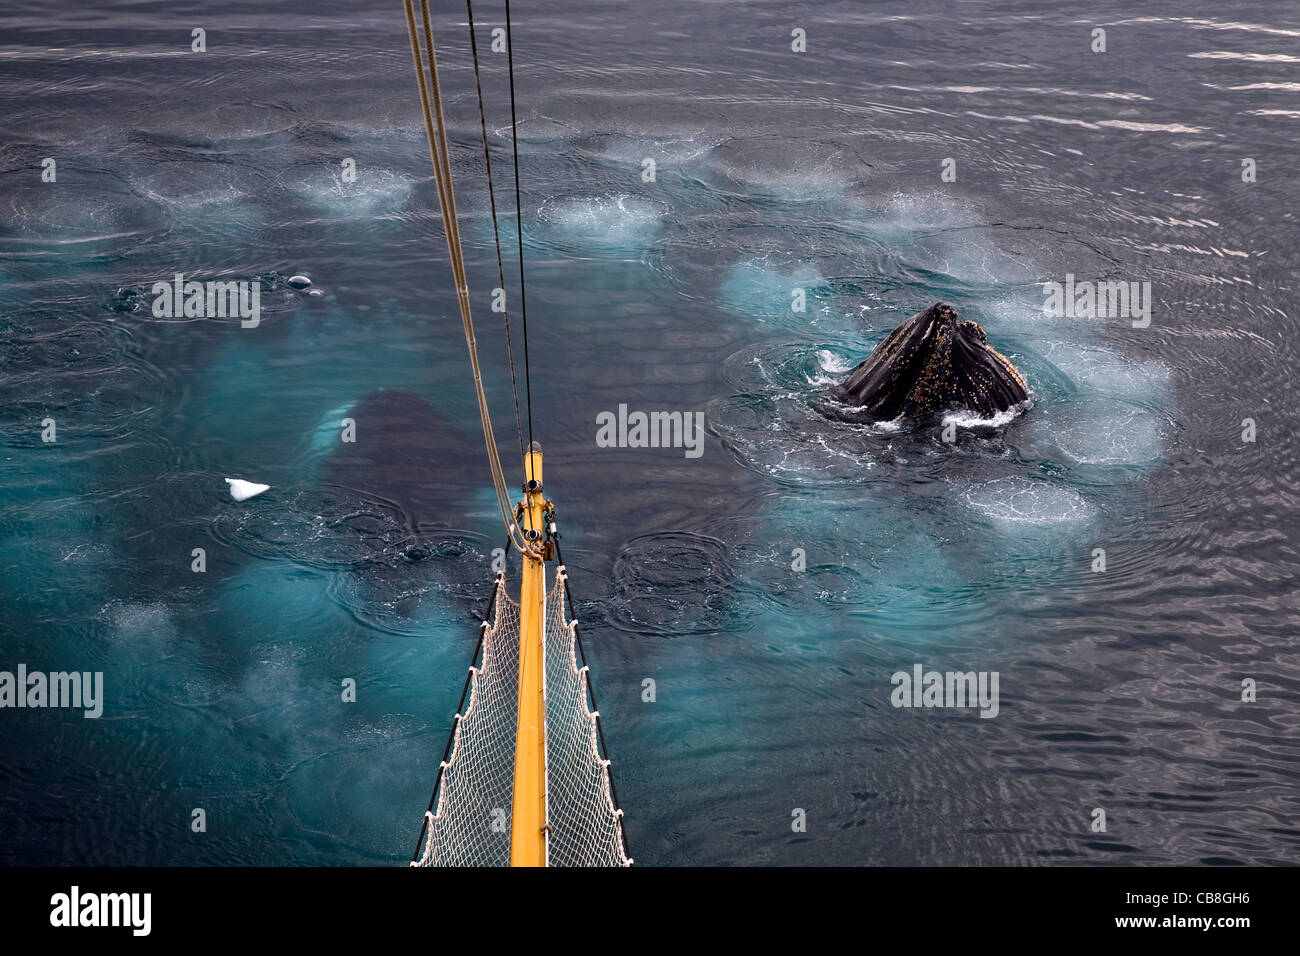 Humpback whales (Megaptera novaeangliae) bubble net feeding by blowing ring of air bubbles at Wilhelmina Bay, Antarctica Stock Photo